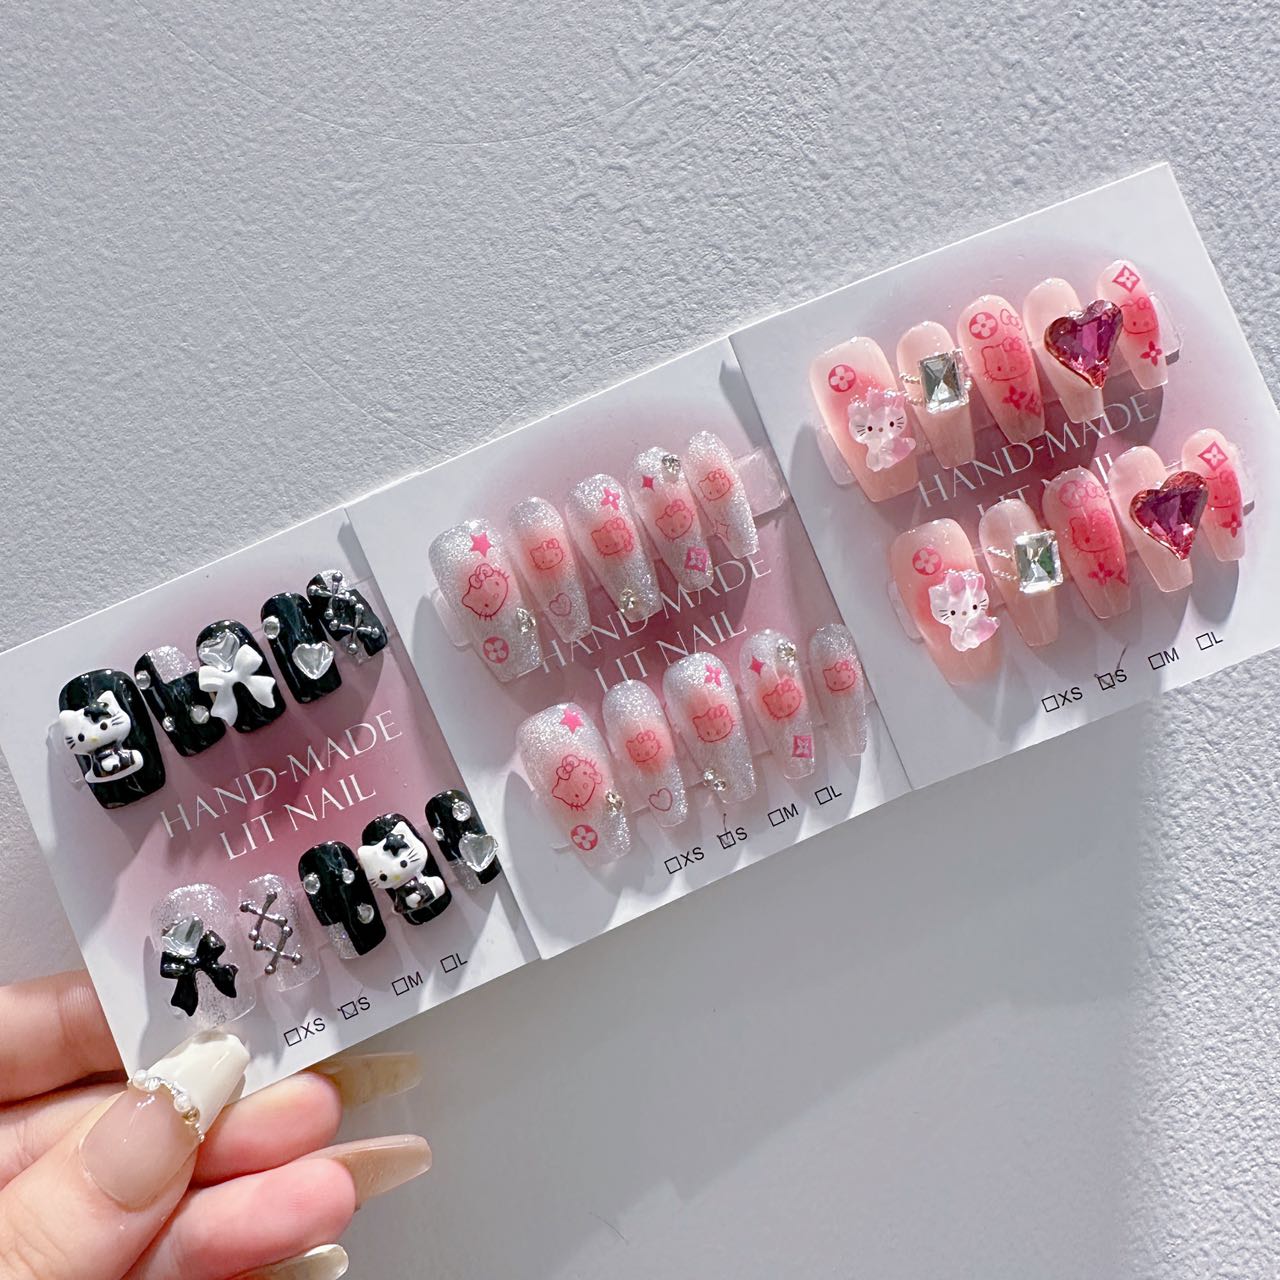 [36.99$/Free Shipping] 3 pairs of handmade nails /Choose ur nails refer to pictrue